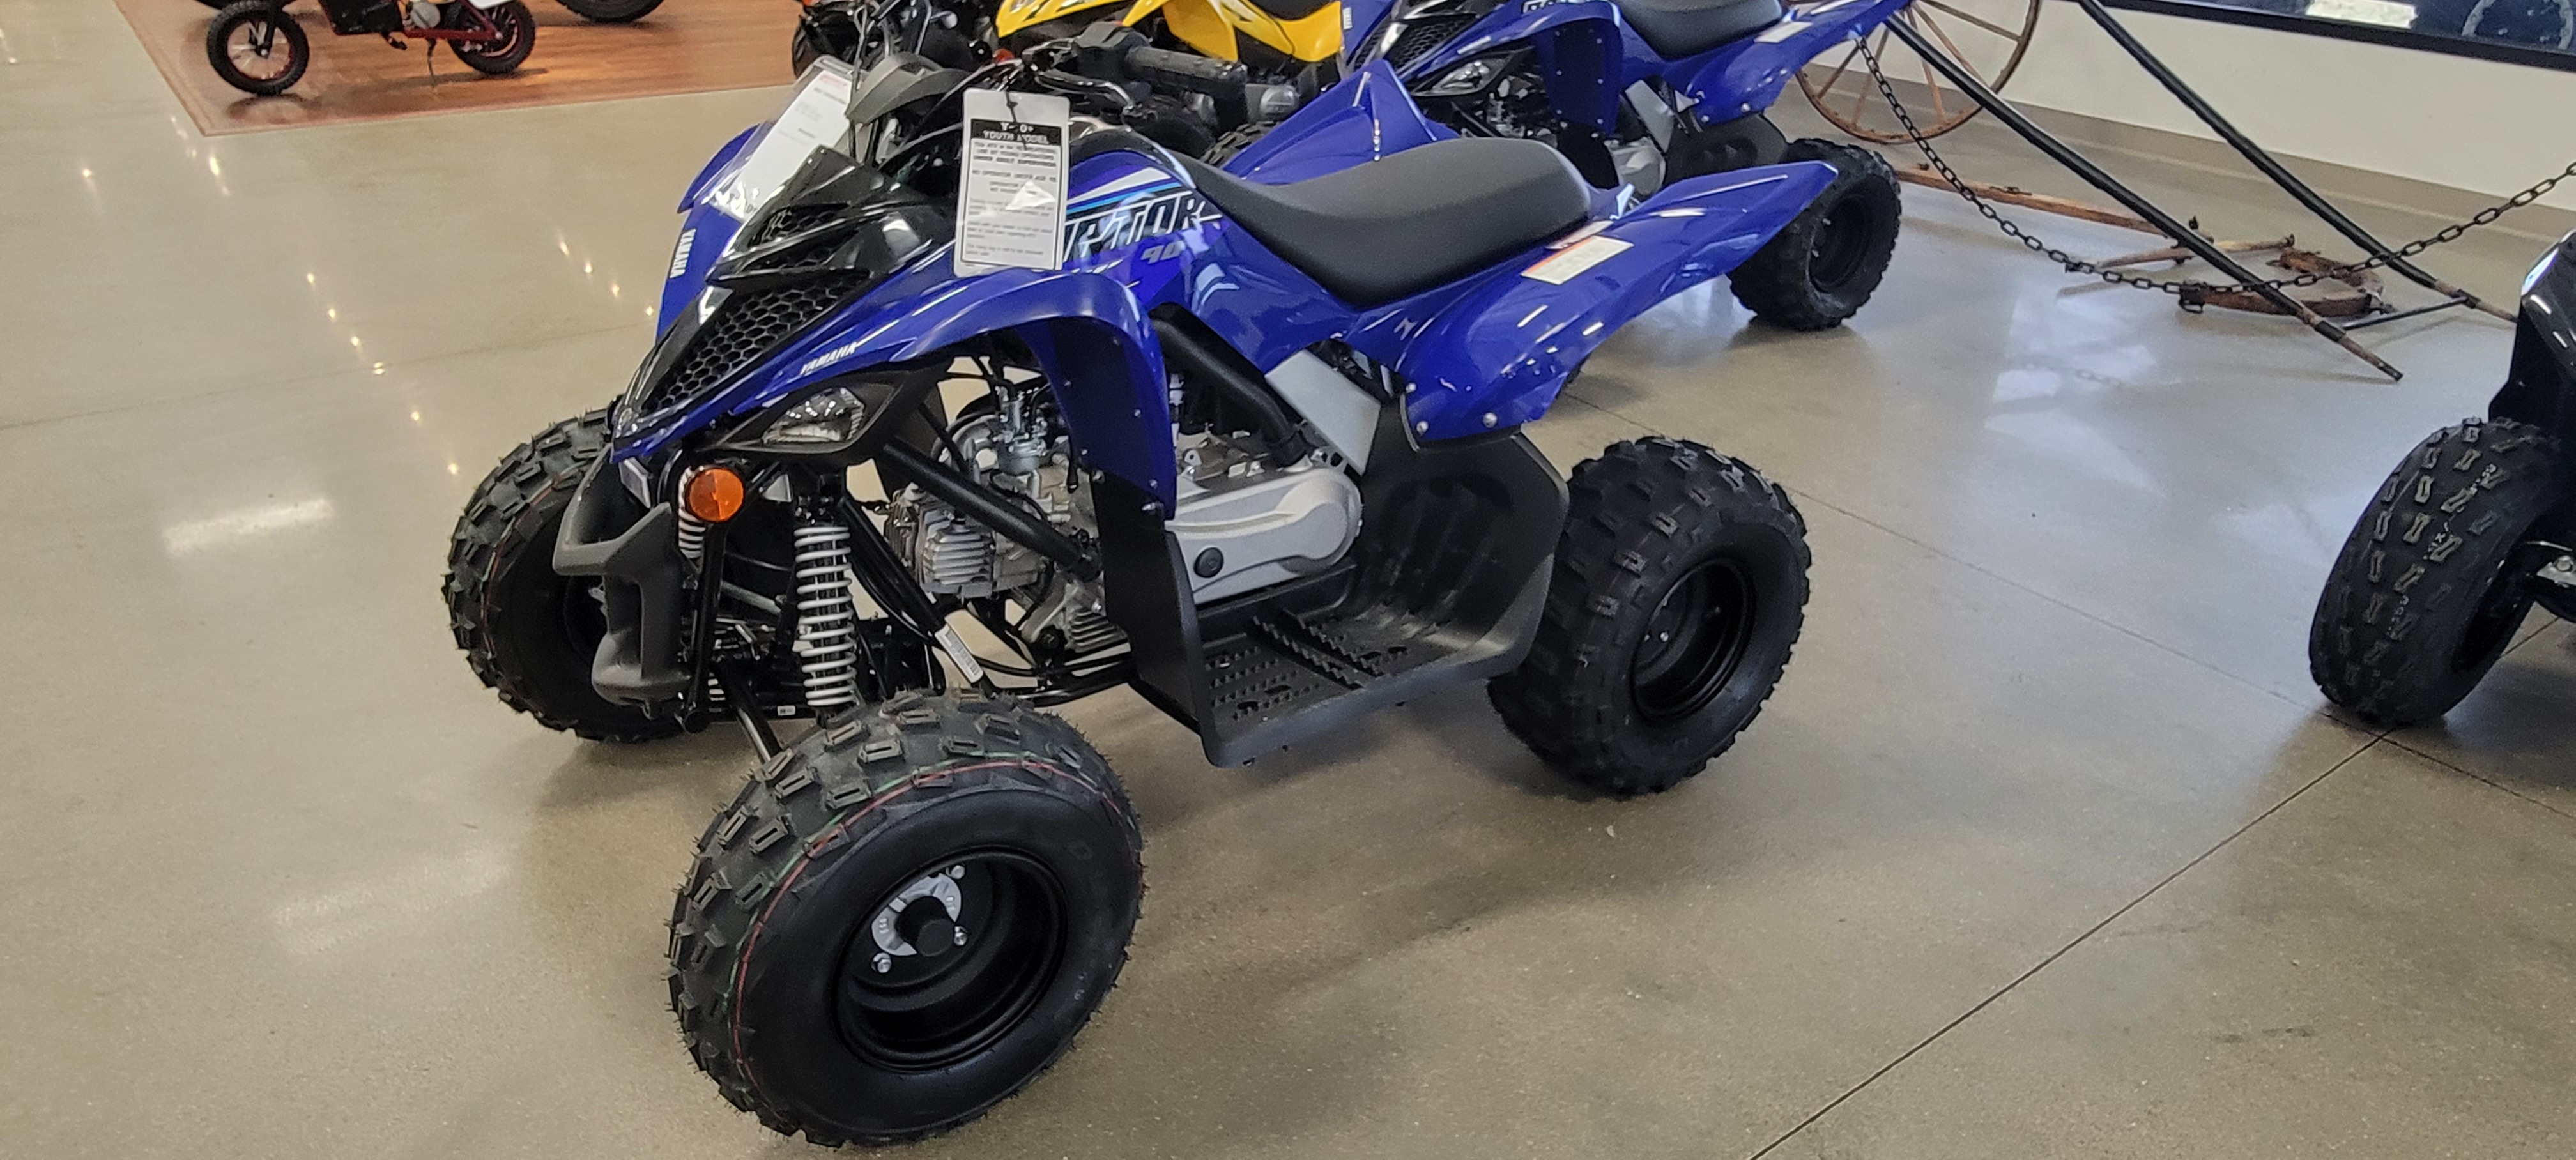 2022 Yamaha Raptor 90 at Brenny's Motorcycle Clinic, Bettendorf, IA 52722